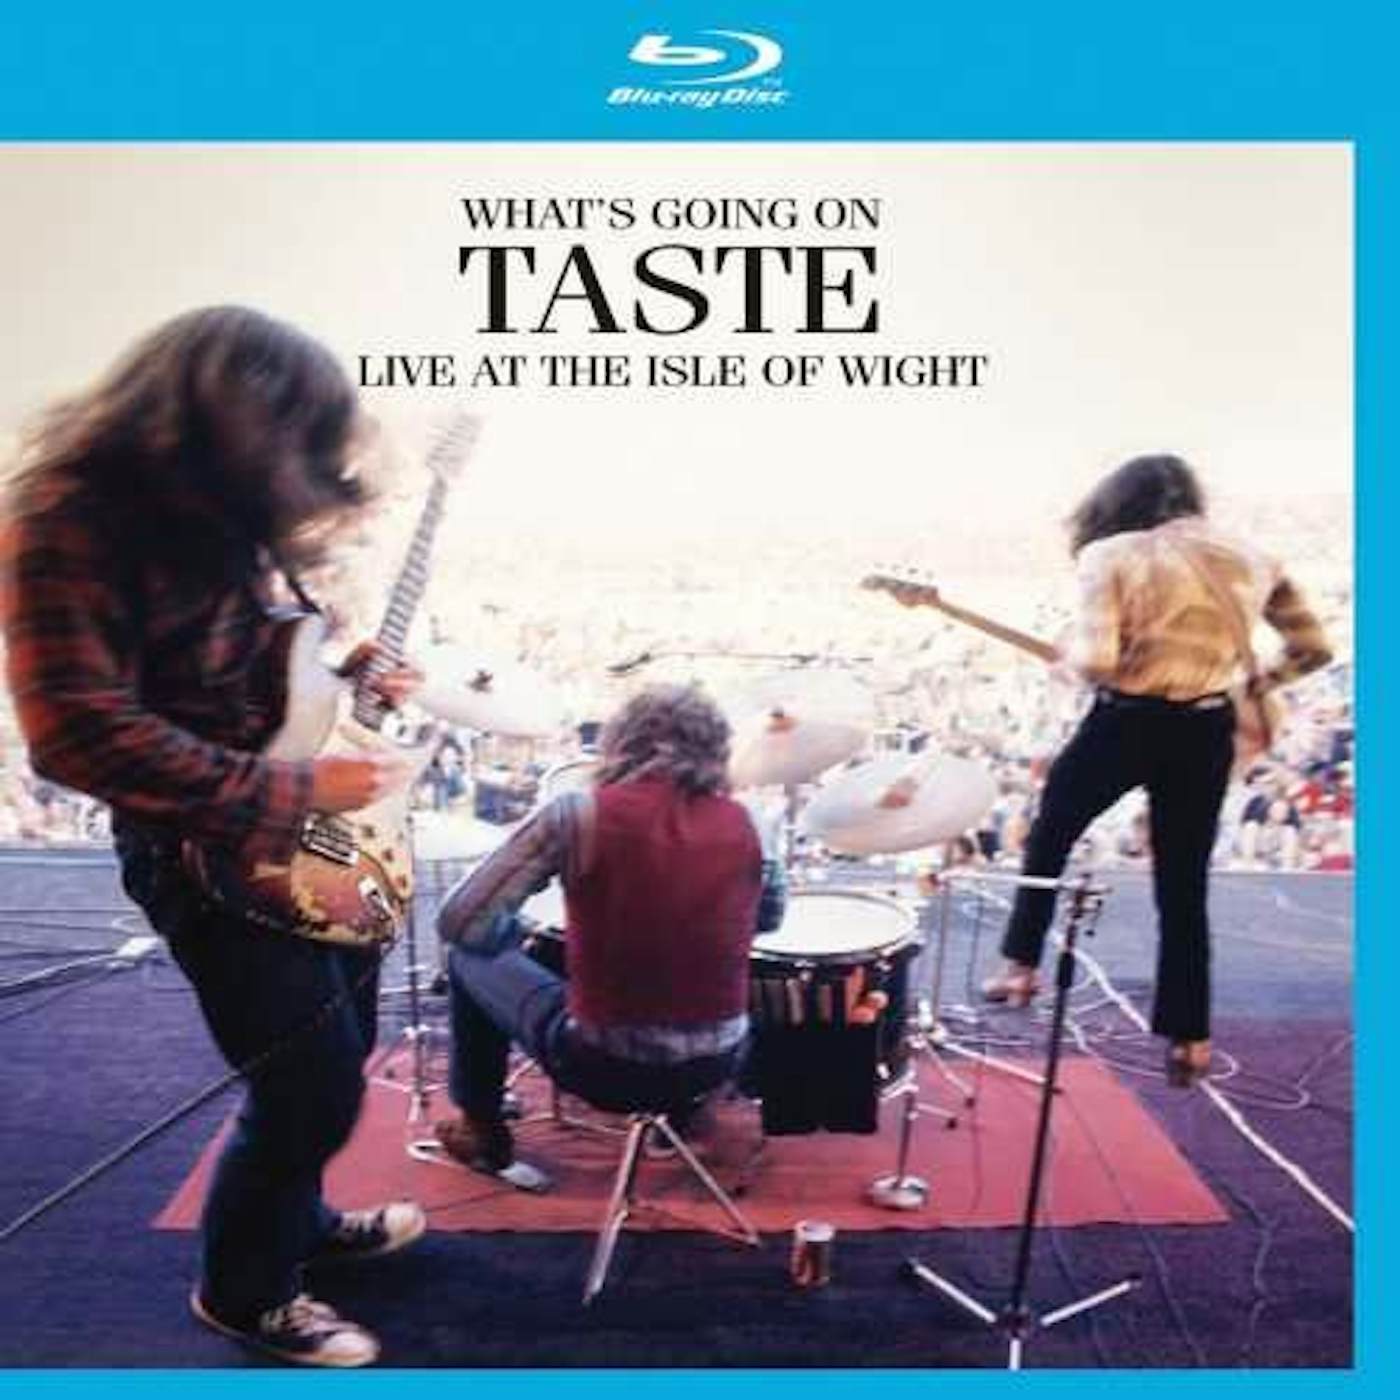 WHAT'S GOING ON TASTE LIVE AT THE ISLE OF WIGHT Blu-ray